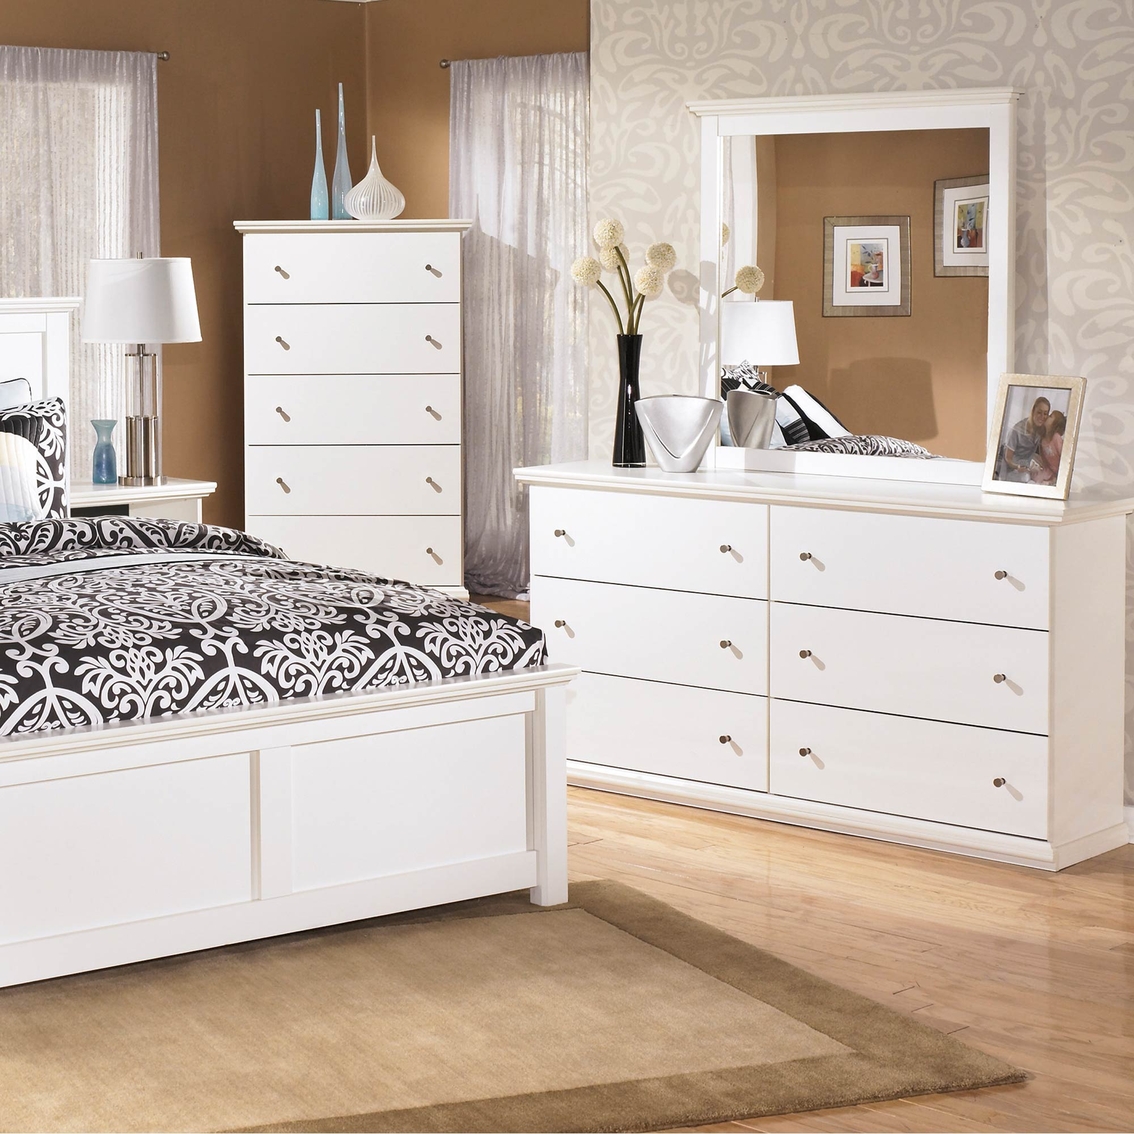 Signature Design by Ashley Bostwick Shoals Dresser and Mirror Set - Image 2 of 4